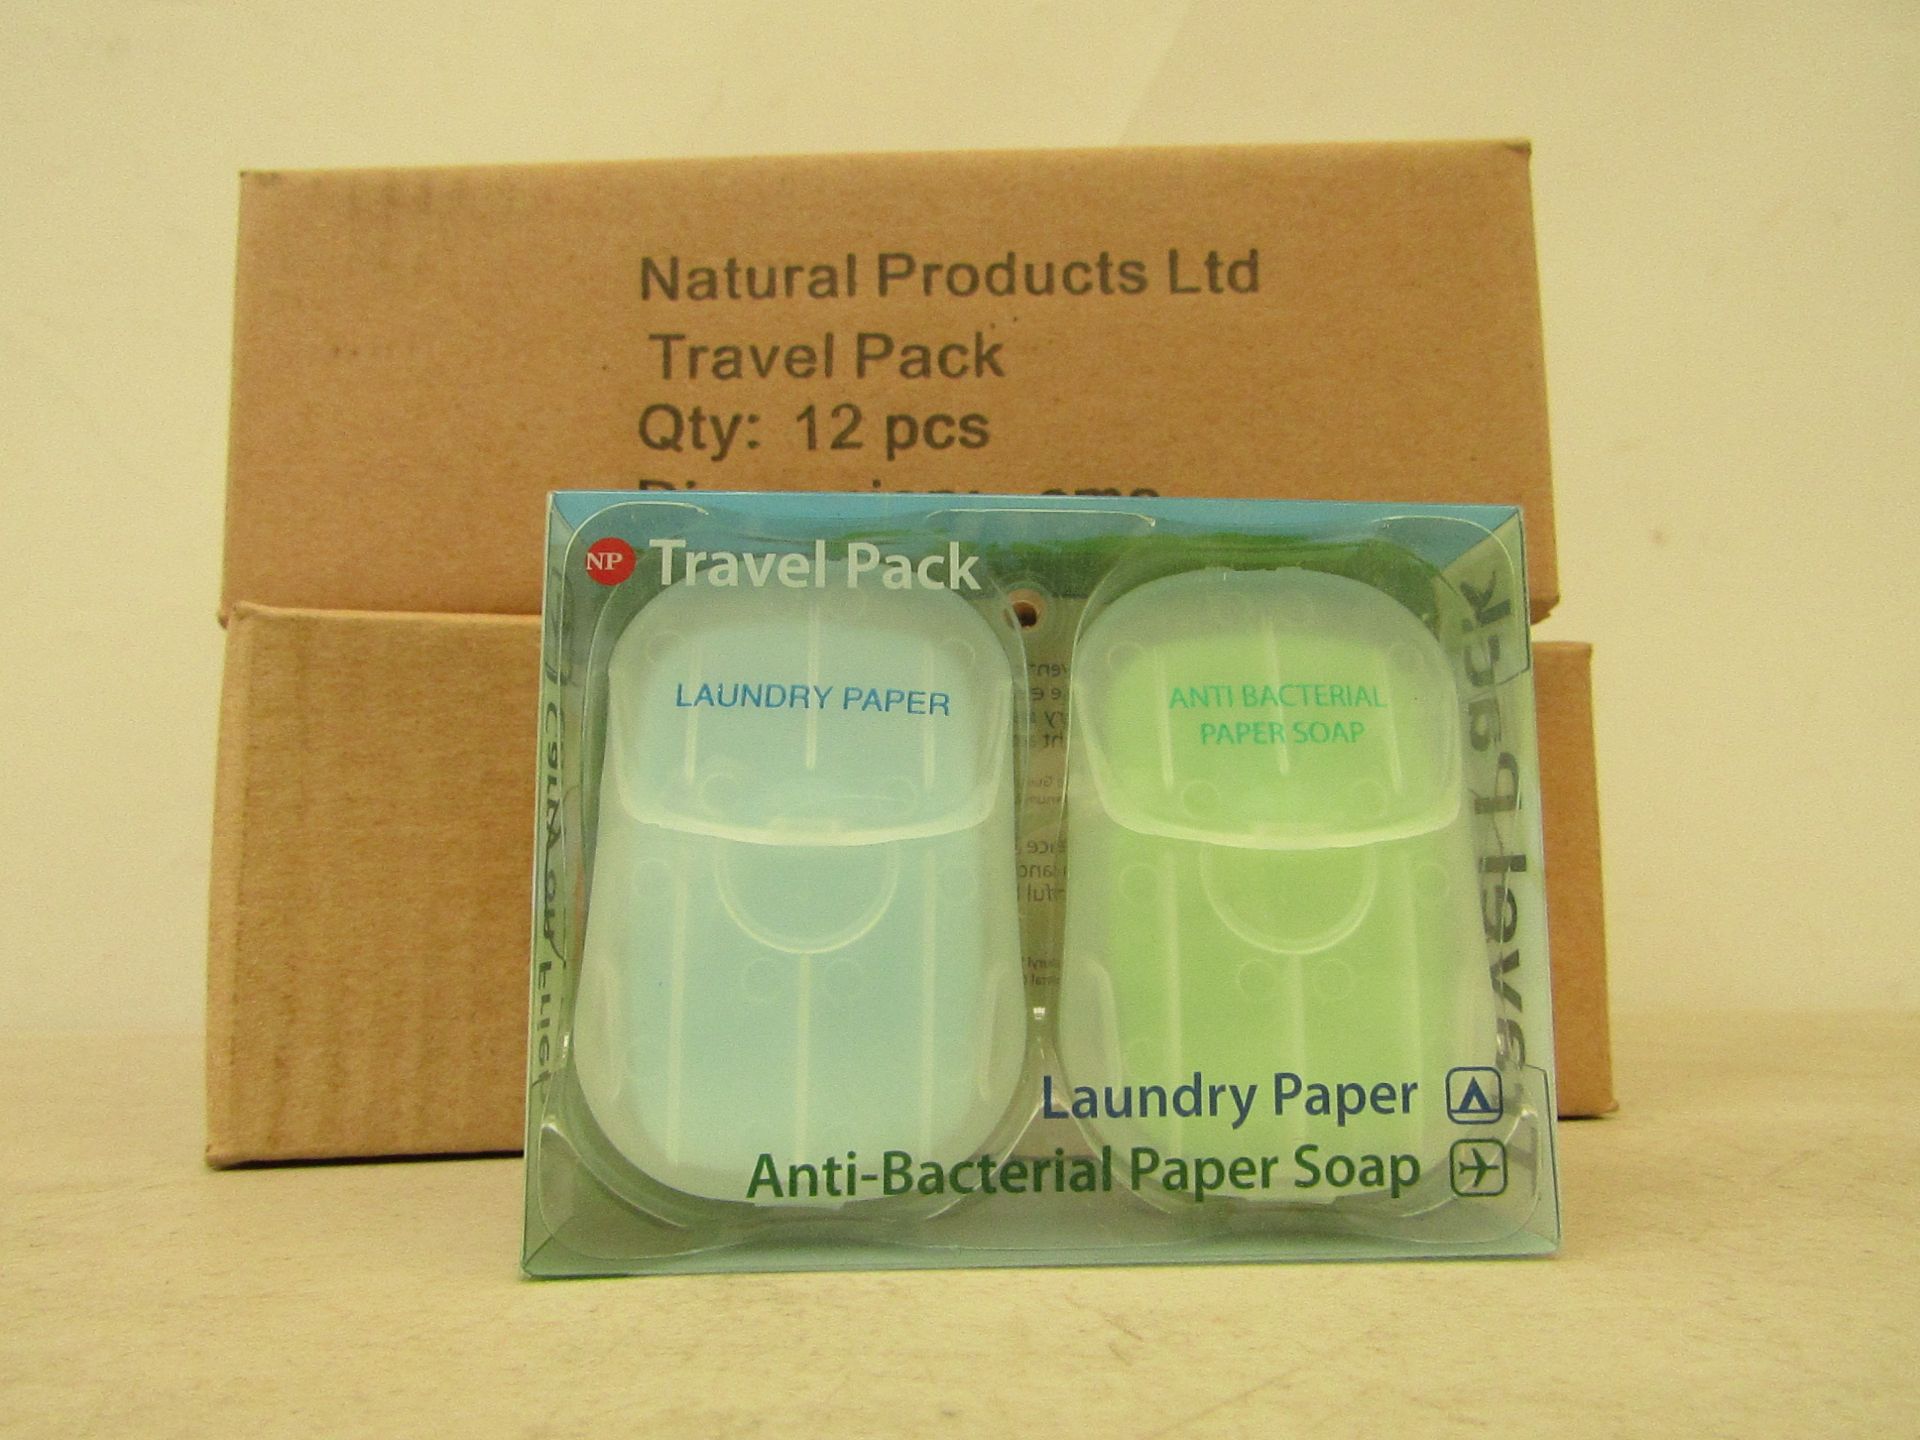 2x Boxes, each containing 12x travel pack laundry paper antibacterial paper soap, new and boxed.